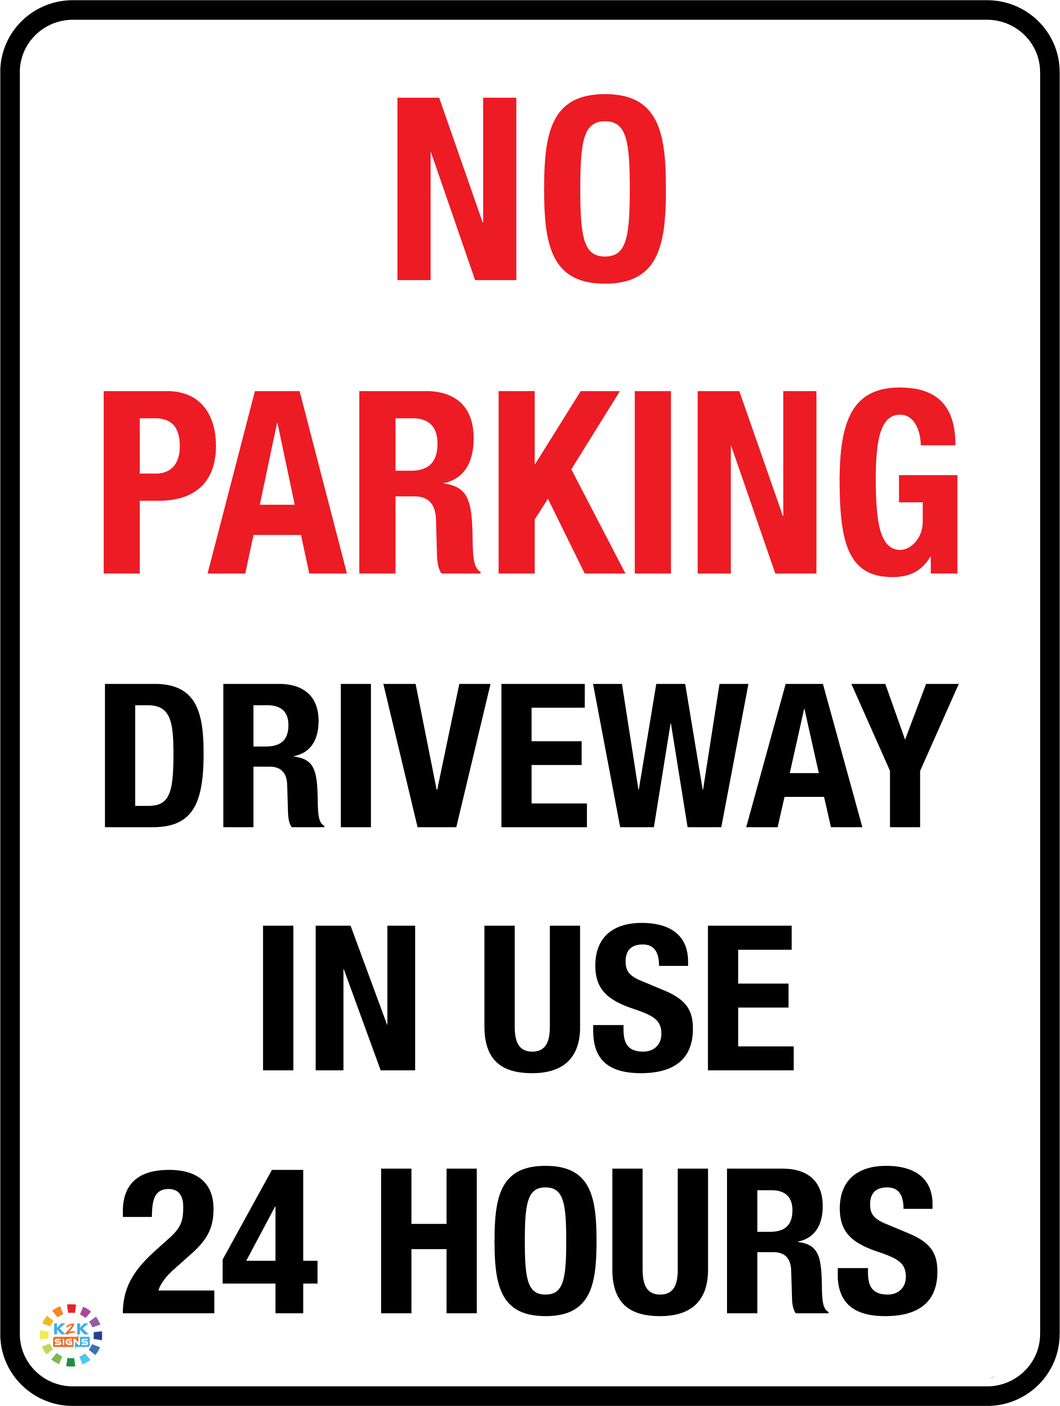 No Parking - Driveway in Use 24 Hours Sign